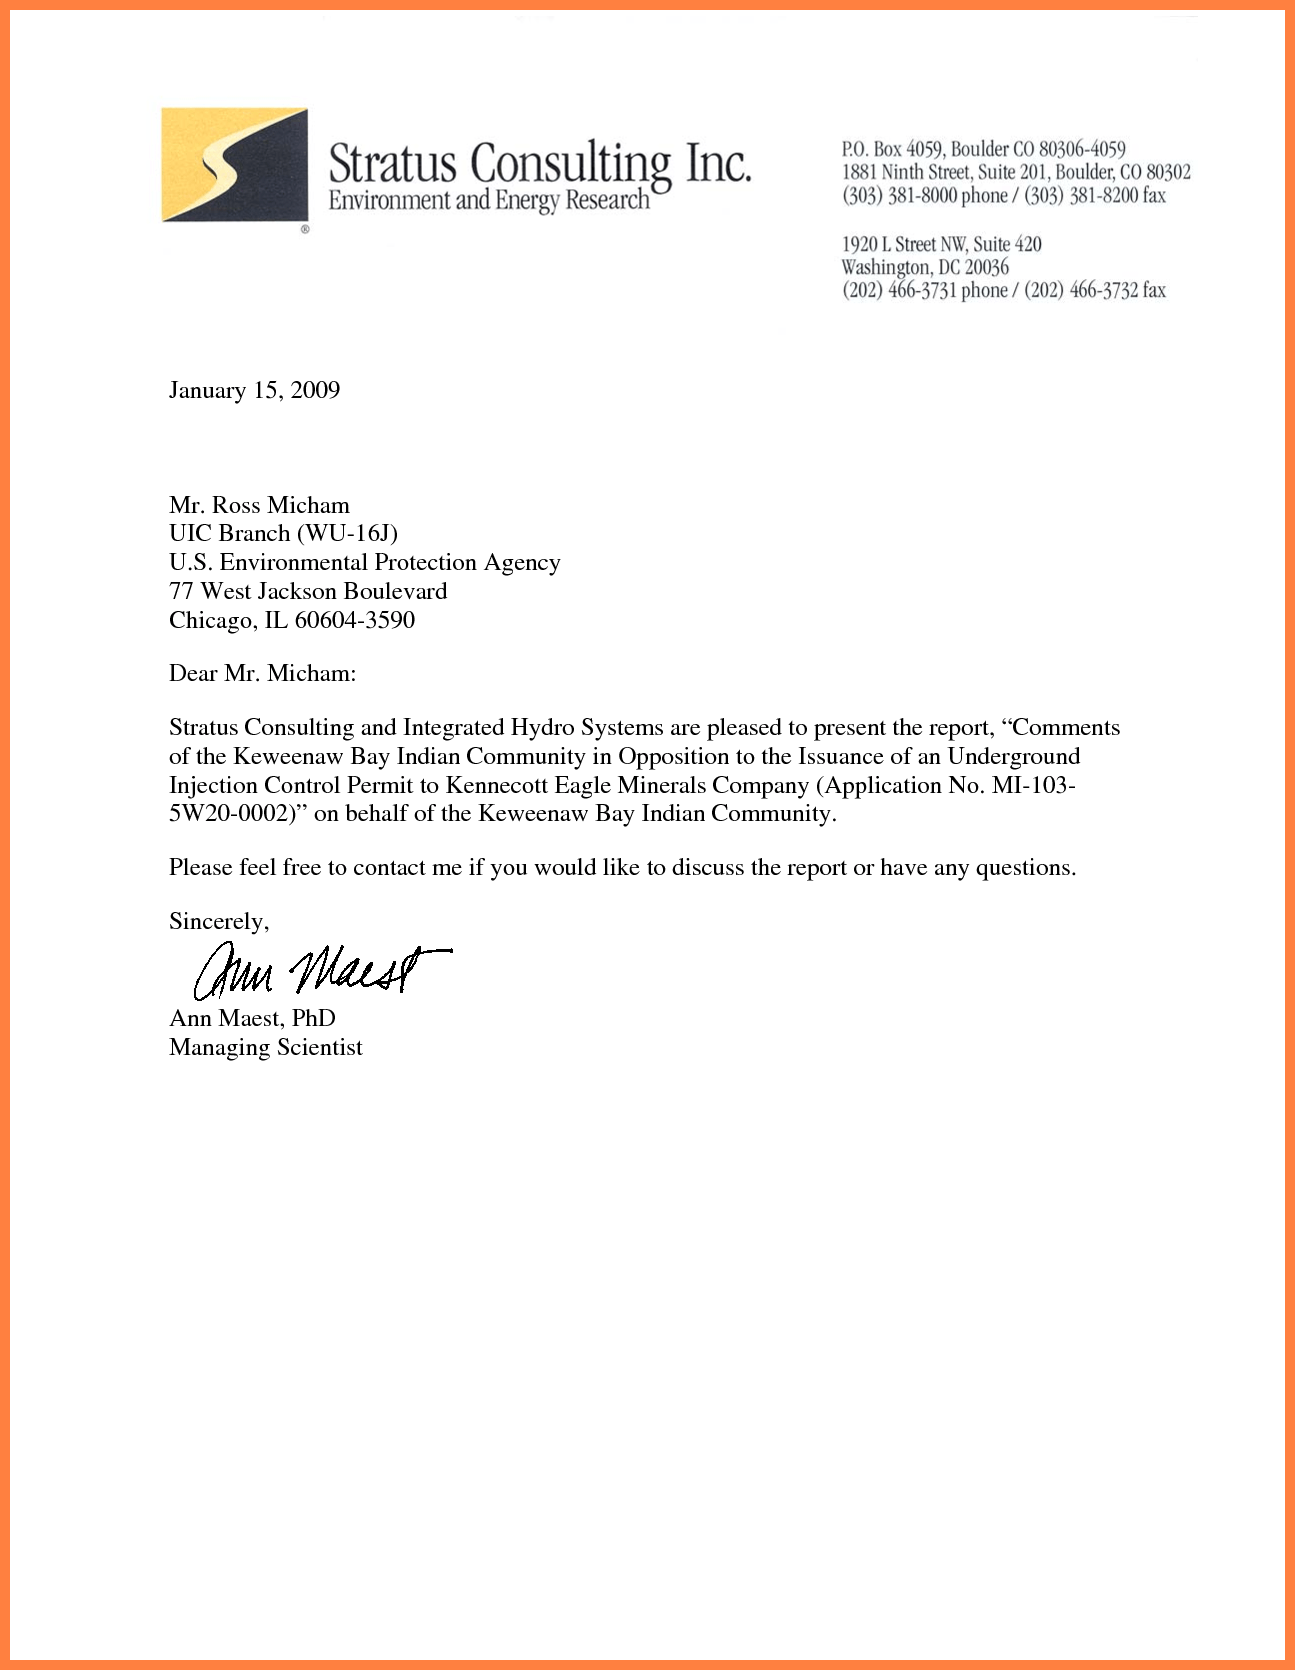 Personal Letter Format With Letterhead pacificstation.co